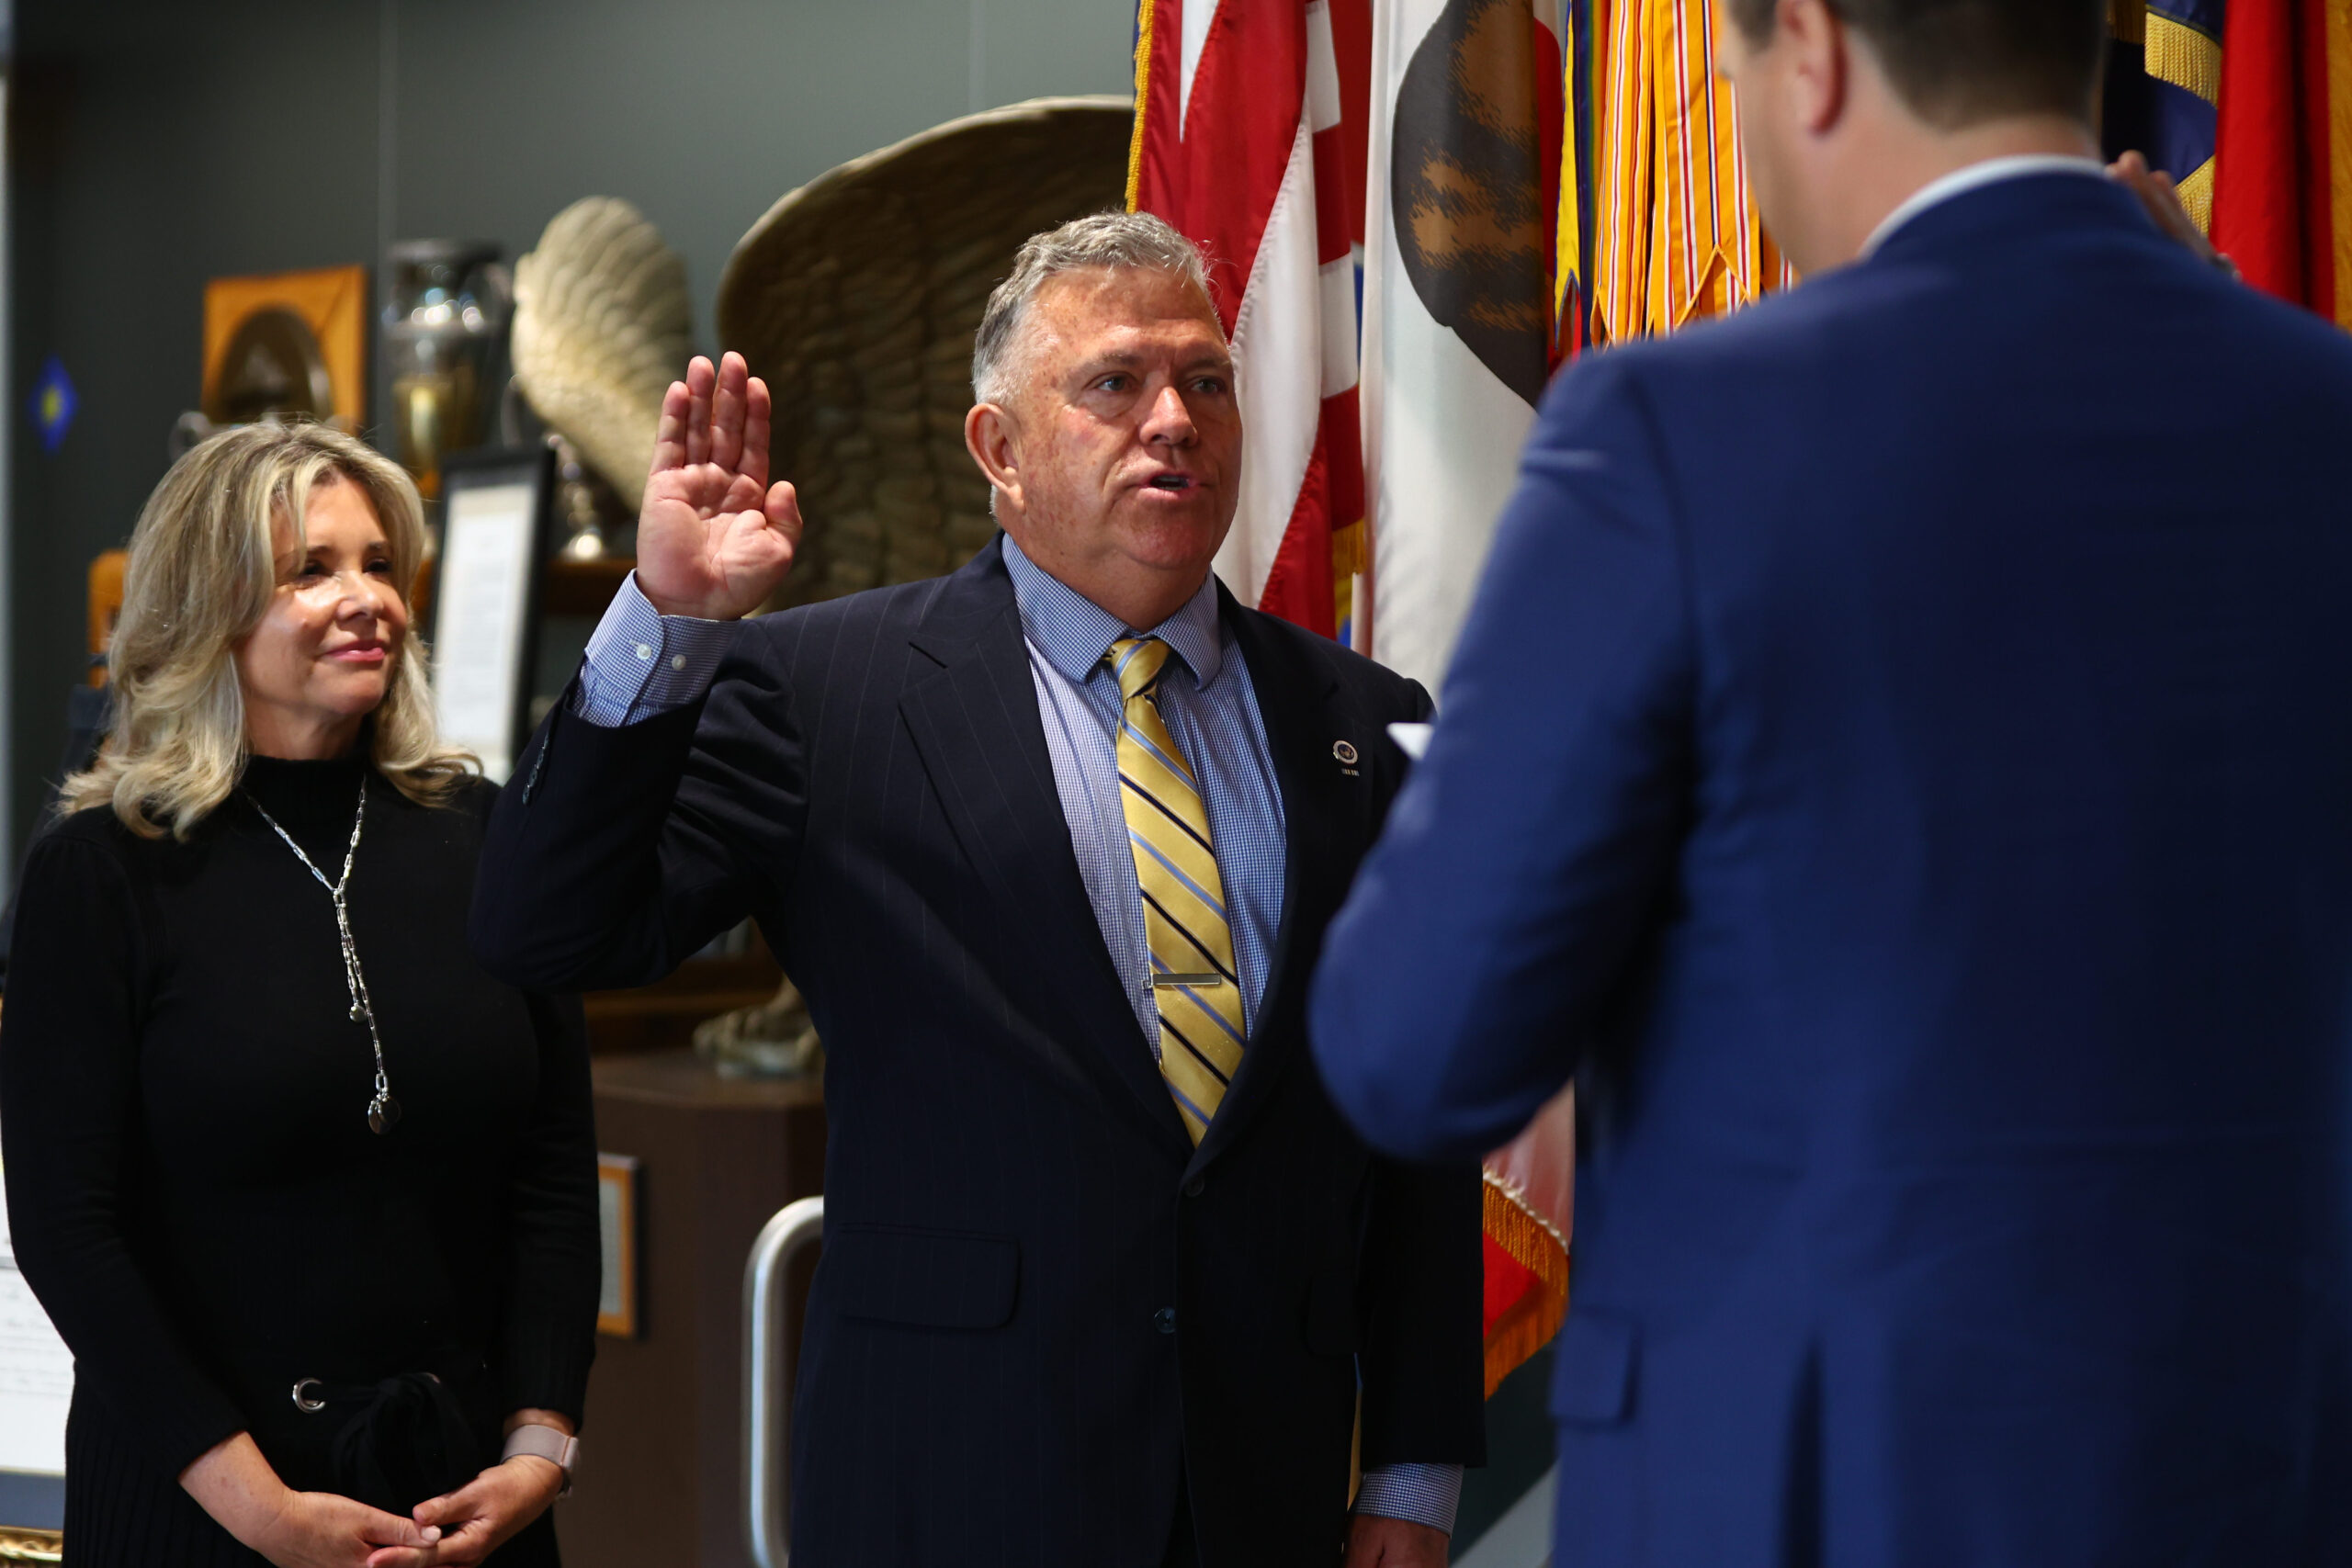 Selective Service System Acting Director Joel C. Spangenberg, right, administers the oath of office to John A. Arobgast, center, the system’s new state director for California, as Arbogast’s wife, Nancie, looks on during a ceremony